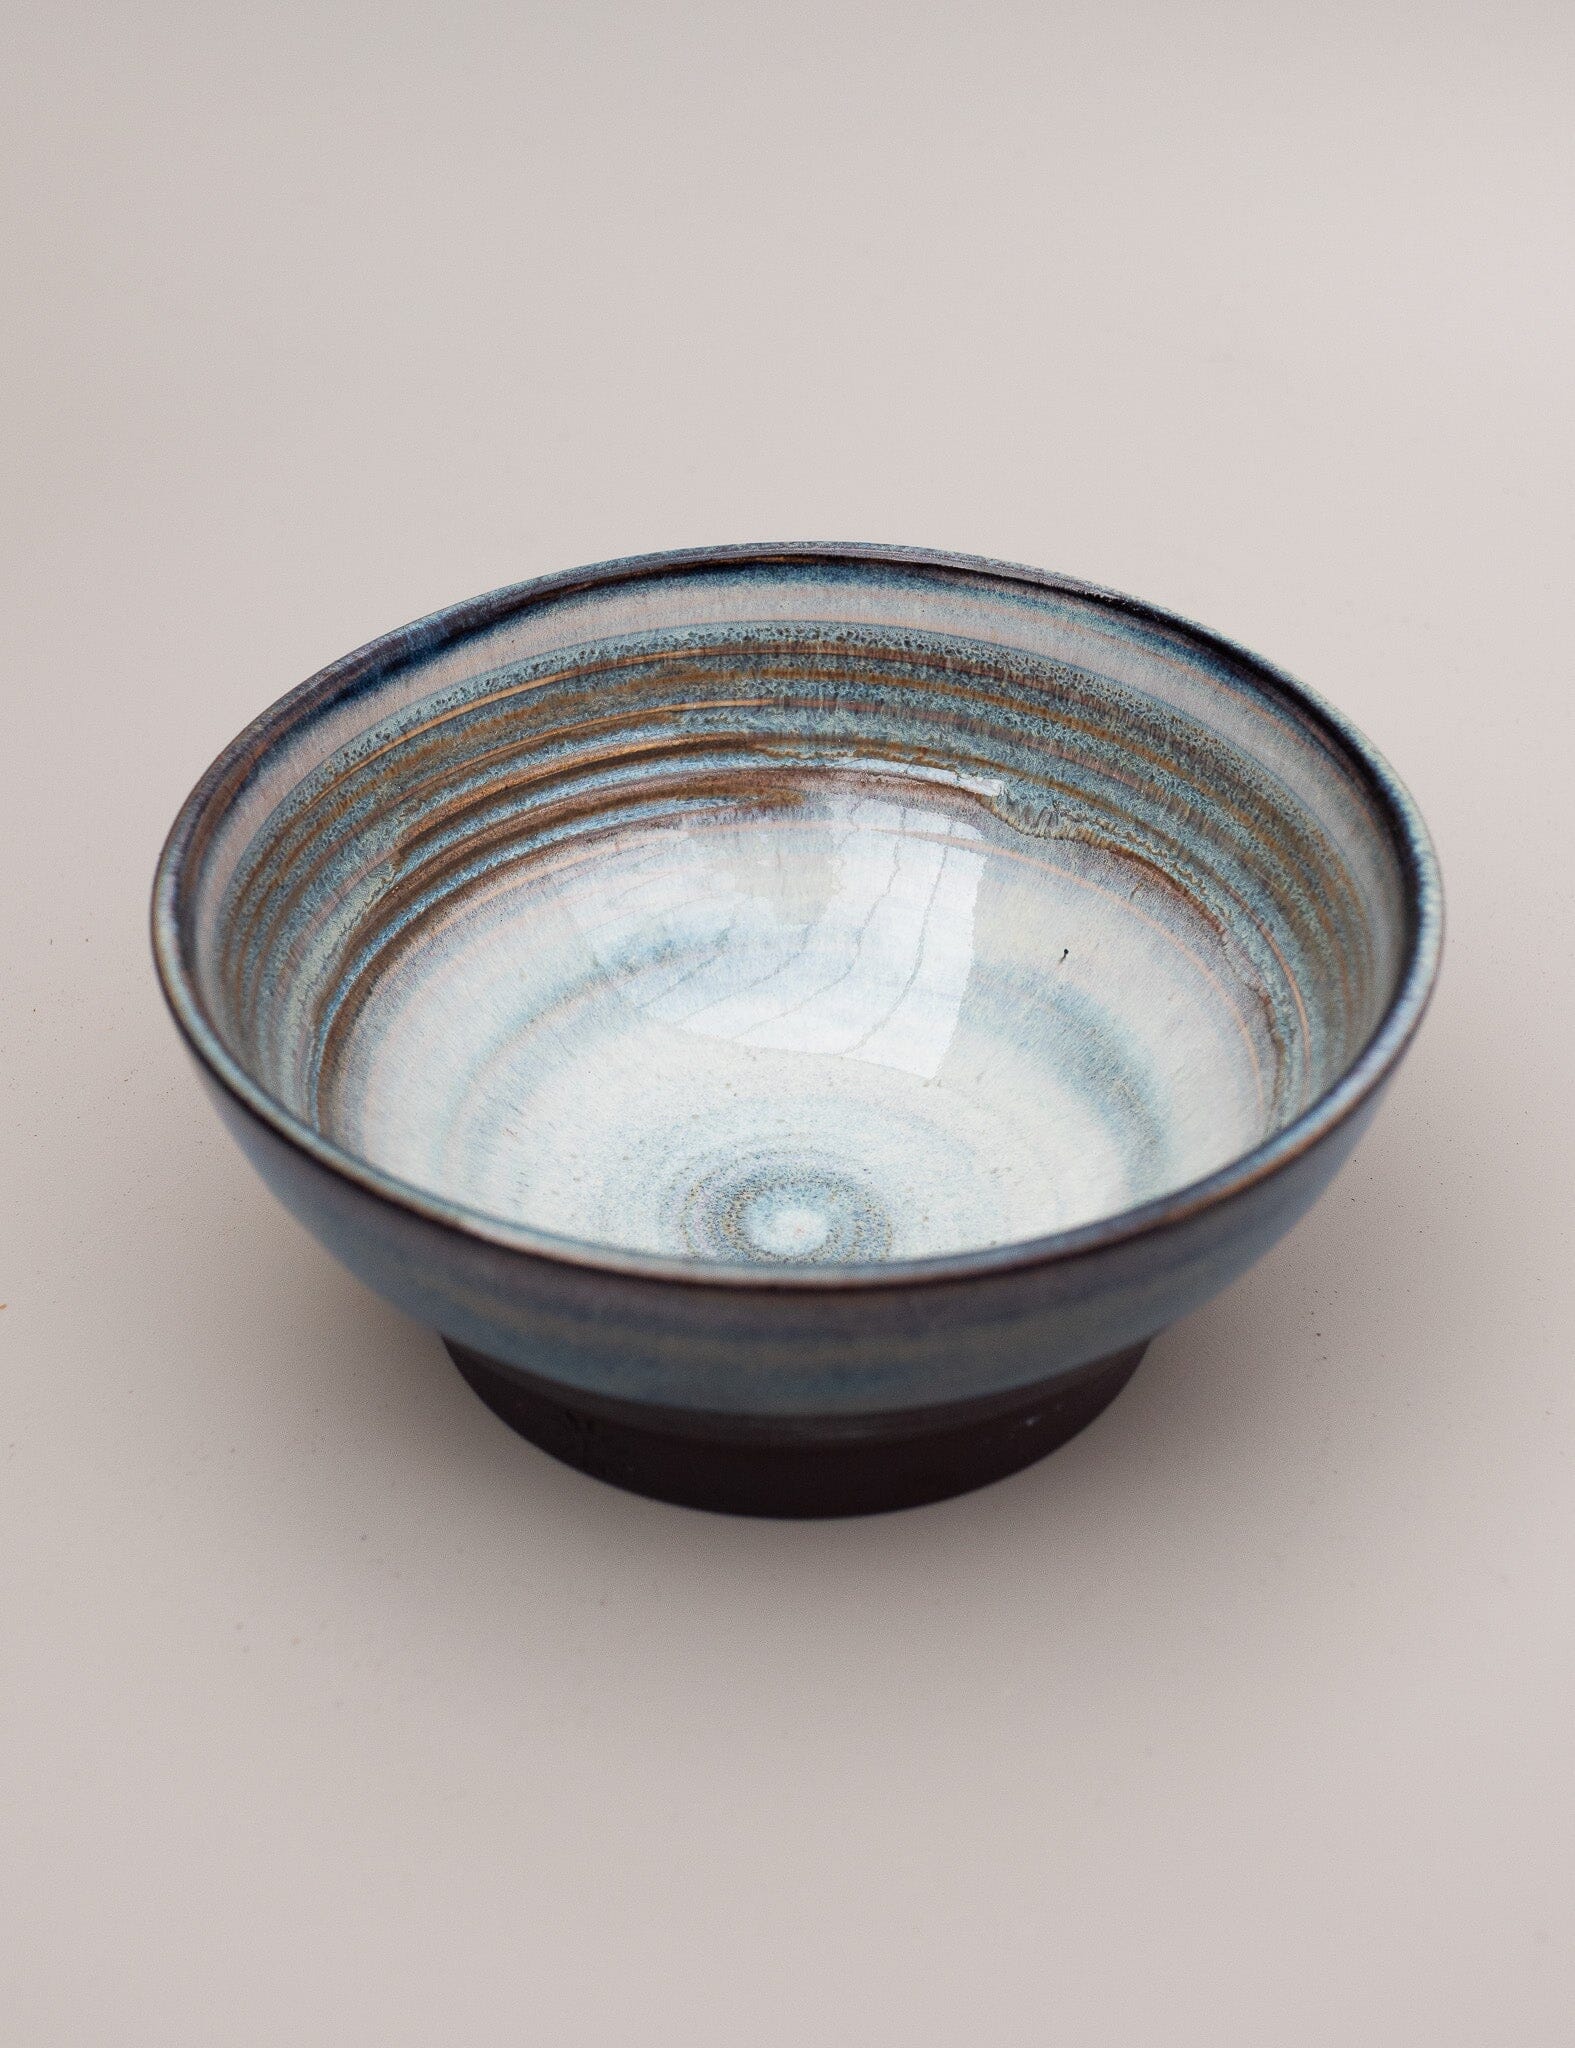 Noodle bowl, hand thrown pottery, stoneware clay